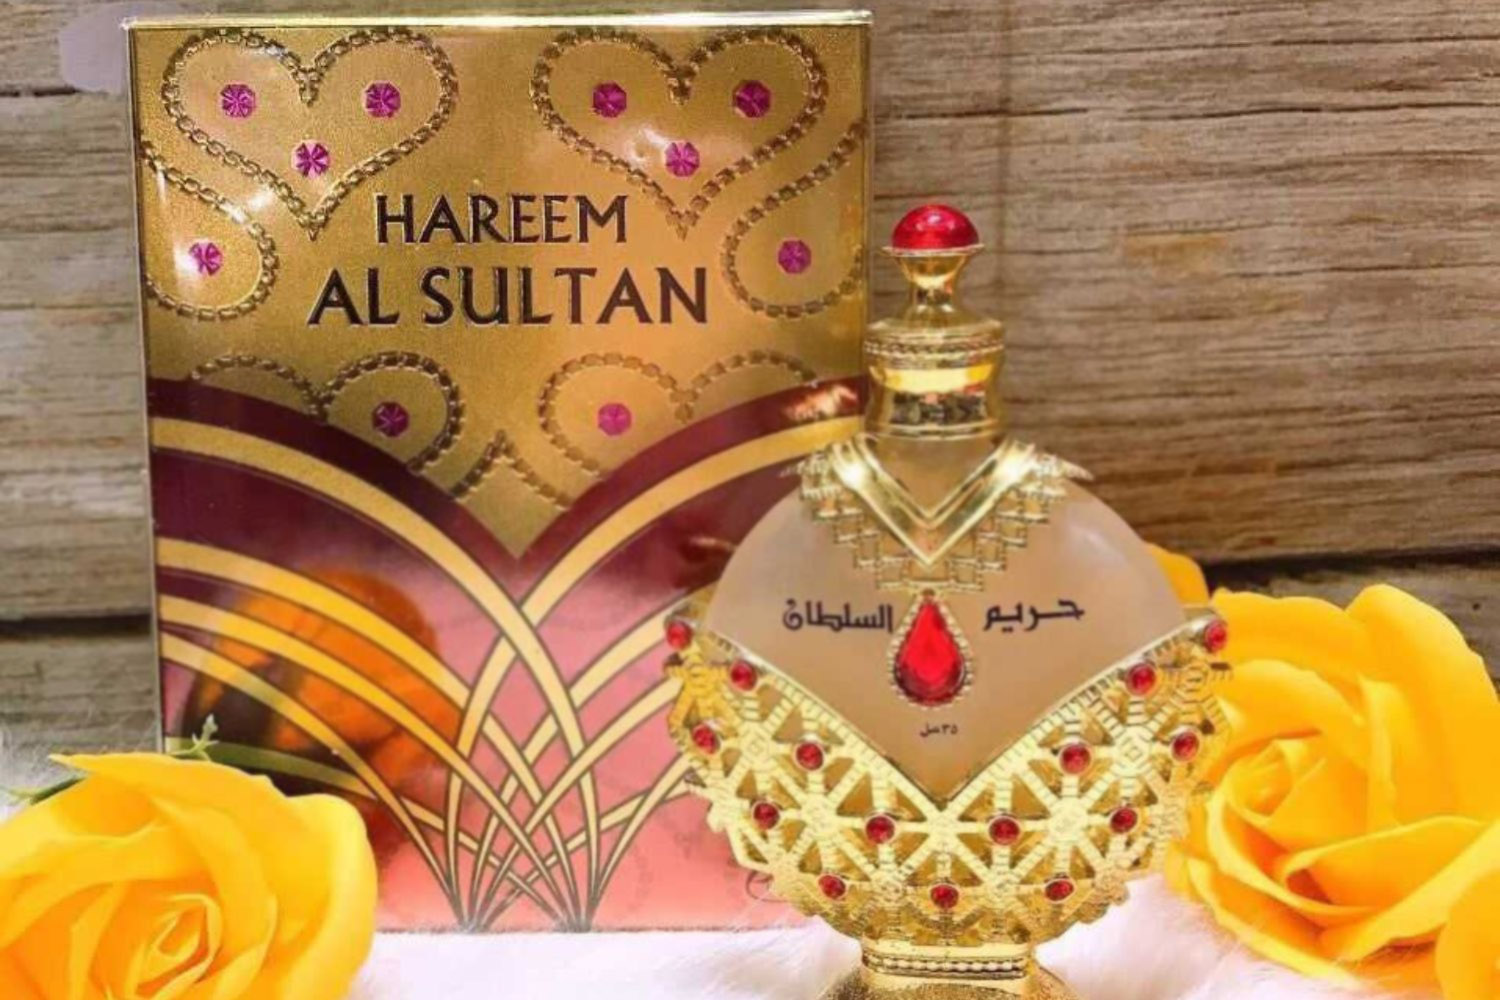 16-surprising-facts-about-hareem-al-sultan-gold